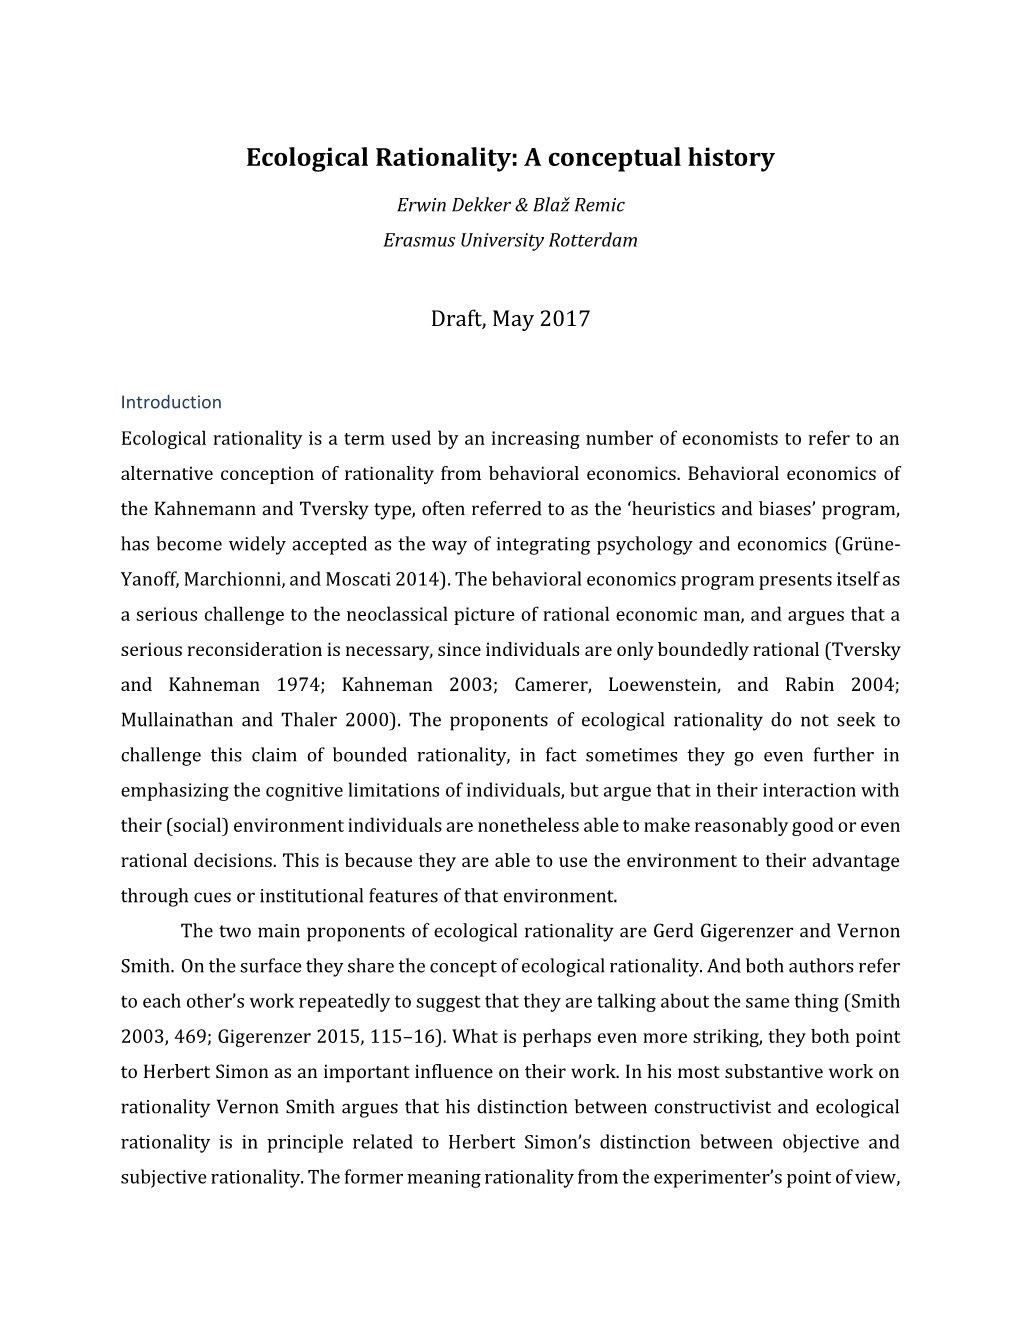 Ecological Rationality: a Conceptual History